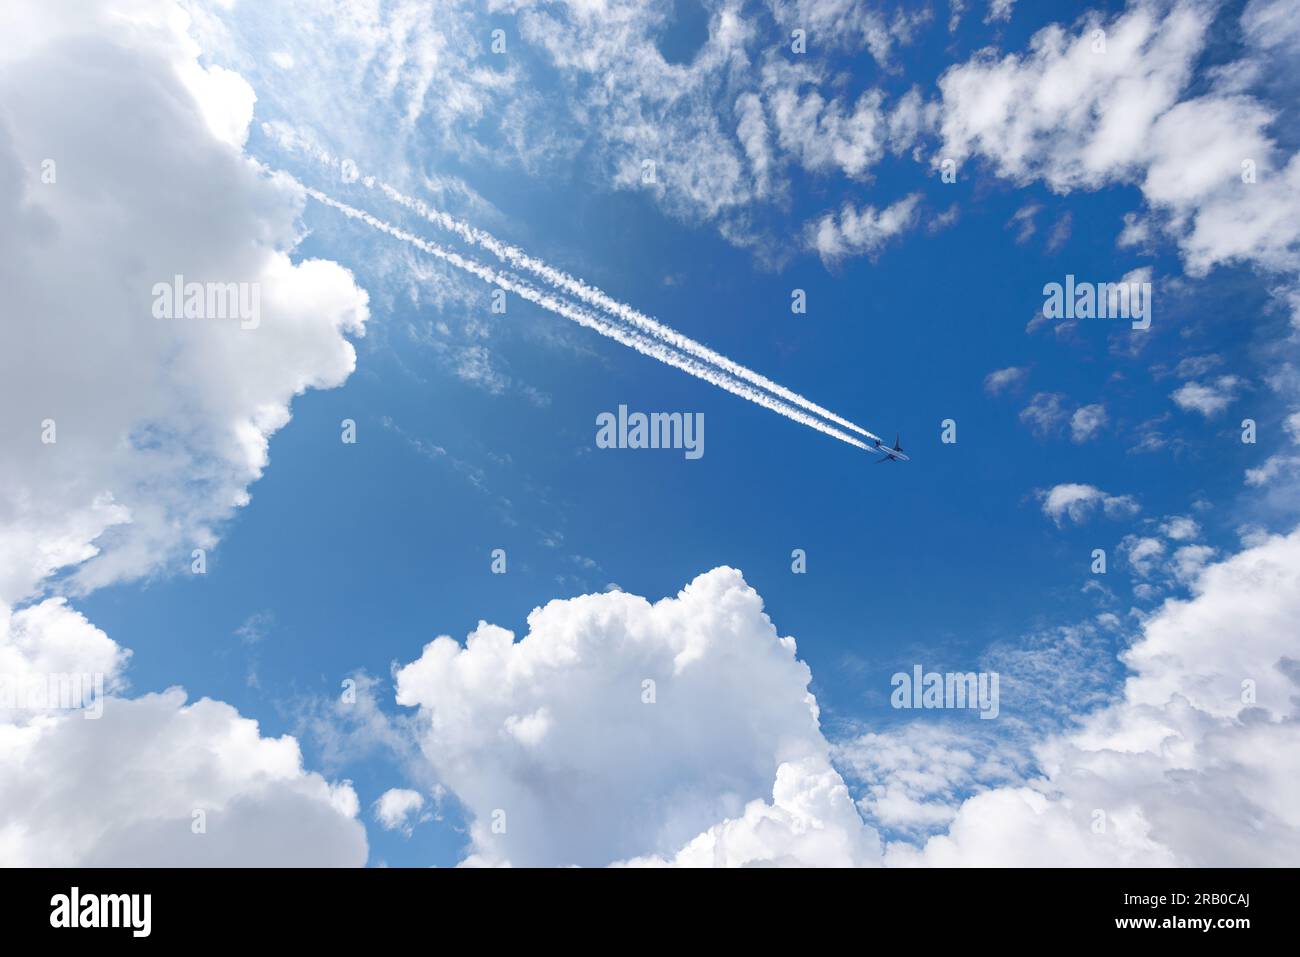 Airliner with contrails flying in a clear blue sky with beautiful cumulus clouds or cumulonimbus. Photography, Full frame. Stock Photo